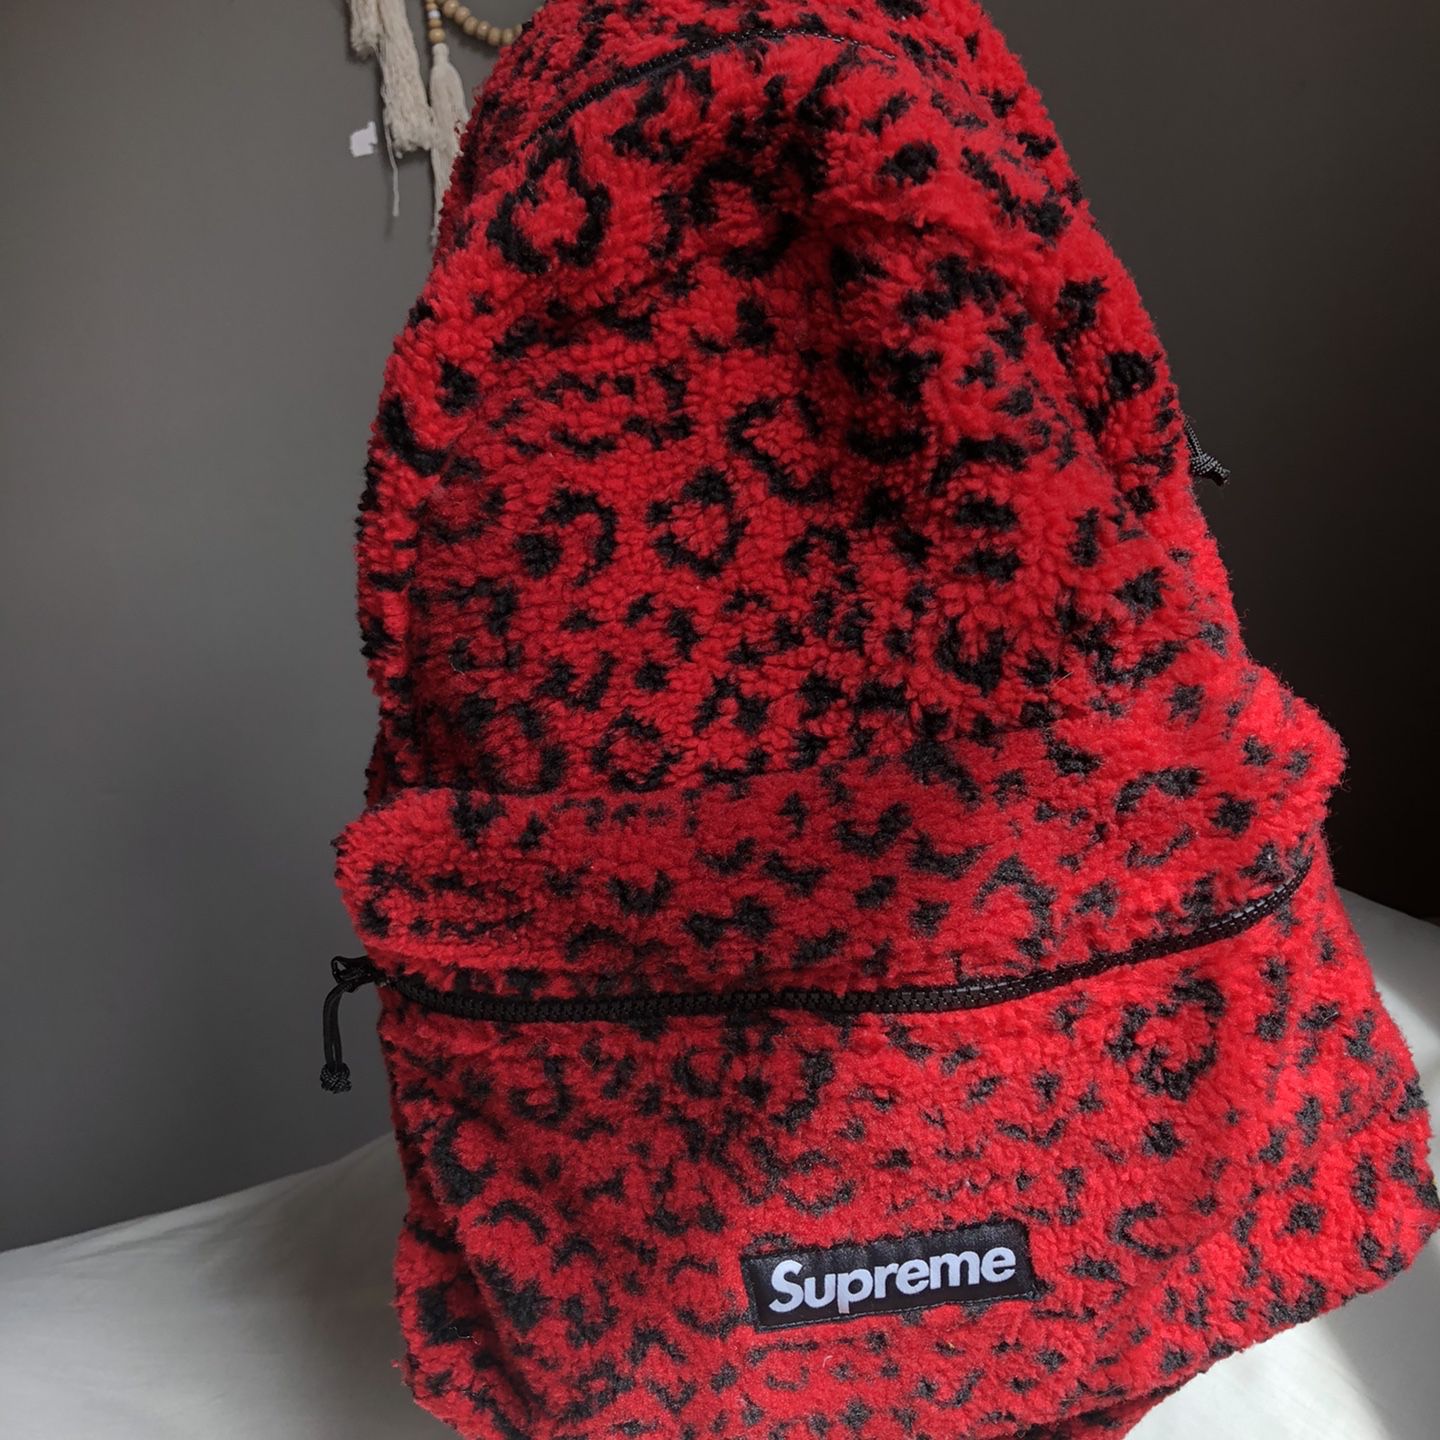 Supreme Leopard Fleece Backpack Unboxing, Packing & Try On! 